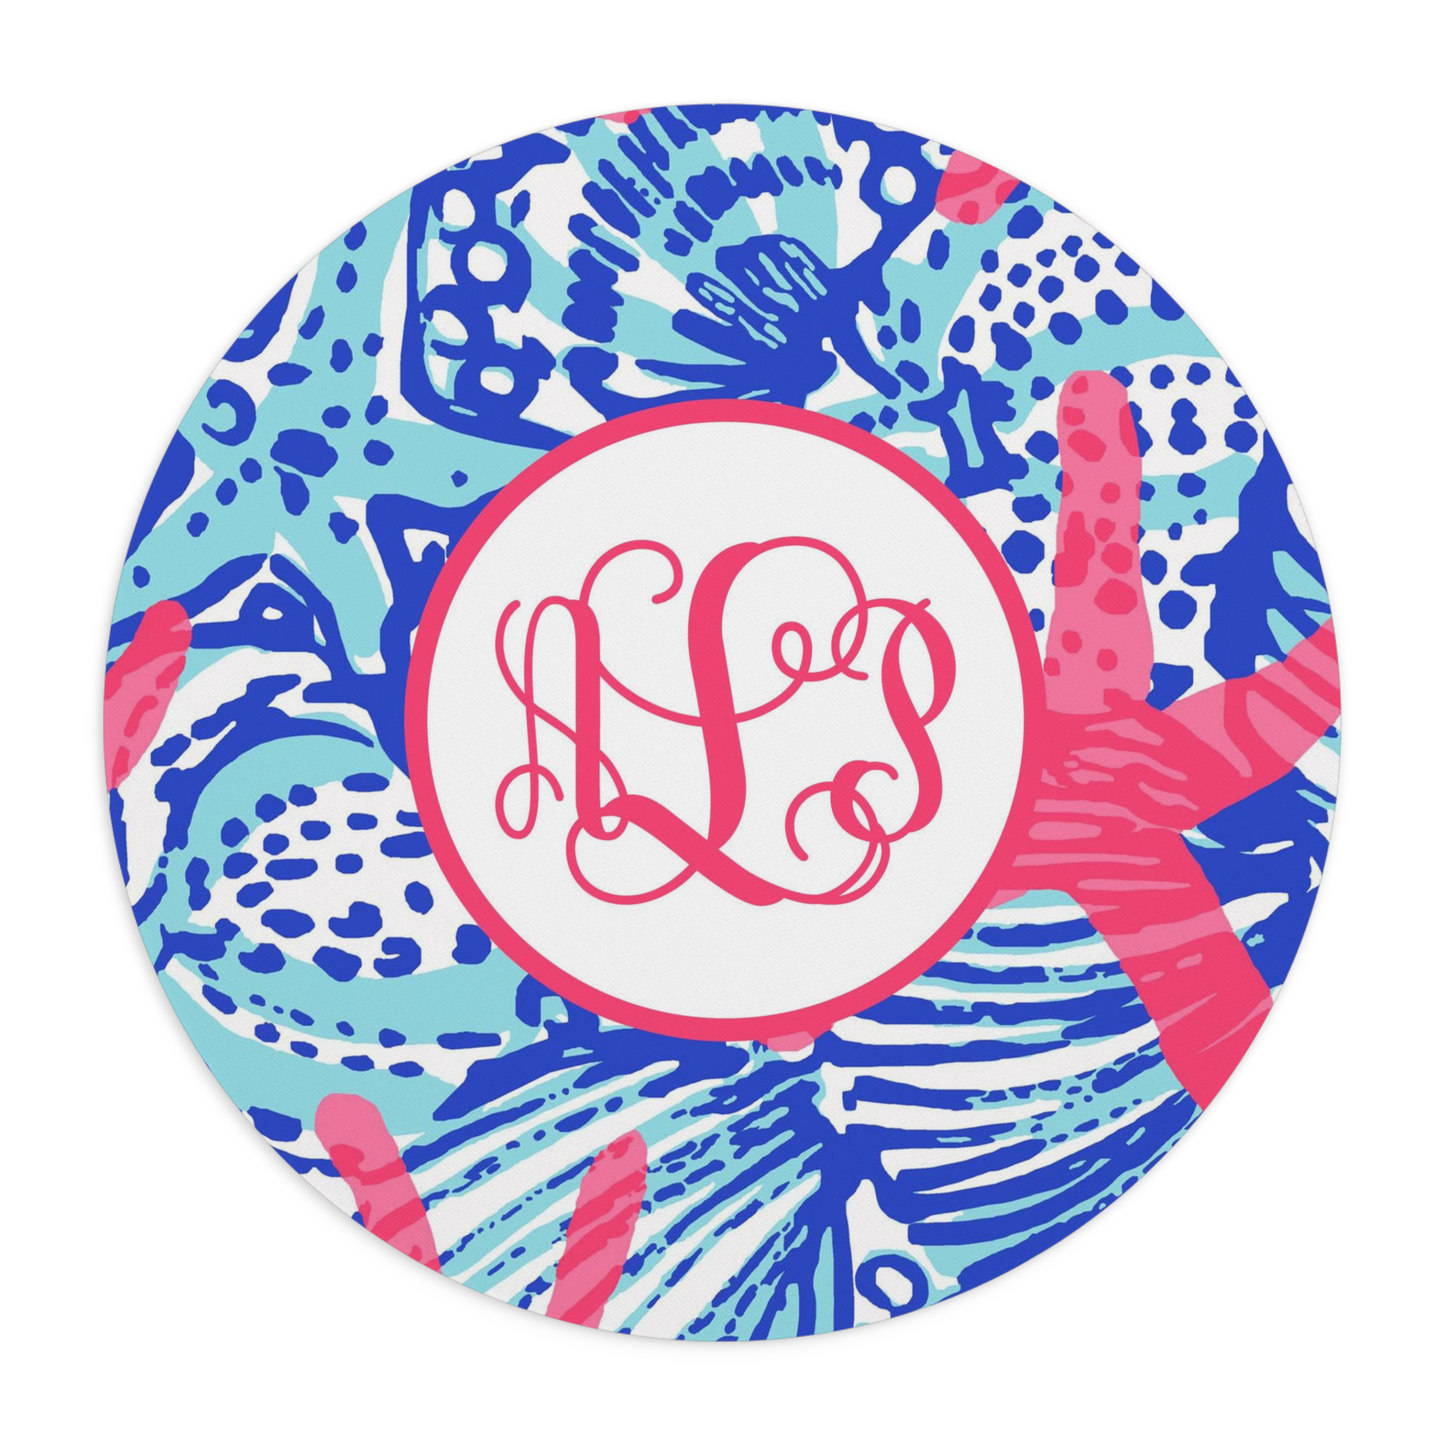 Patterned Monogram Mouse Pad - Round